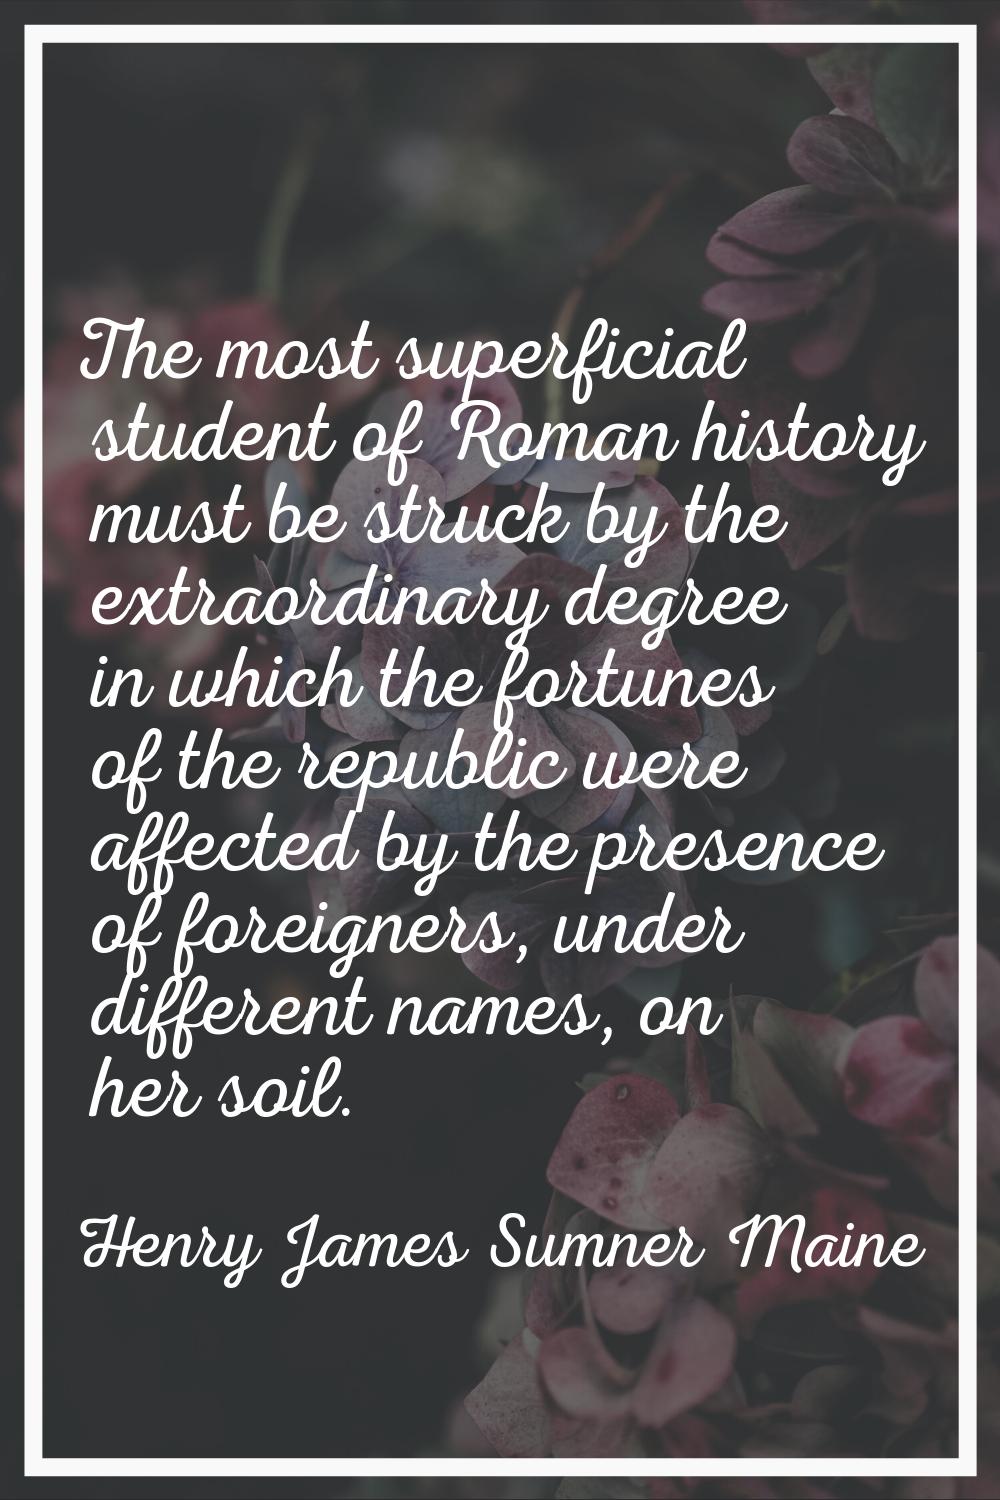 The most superficial student of Roman history must be struck by the extraordinary degree in which t